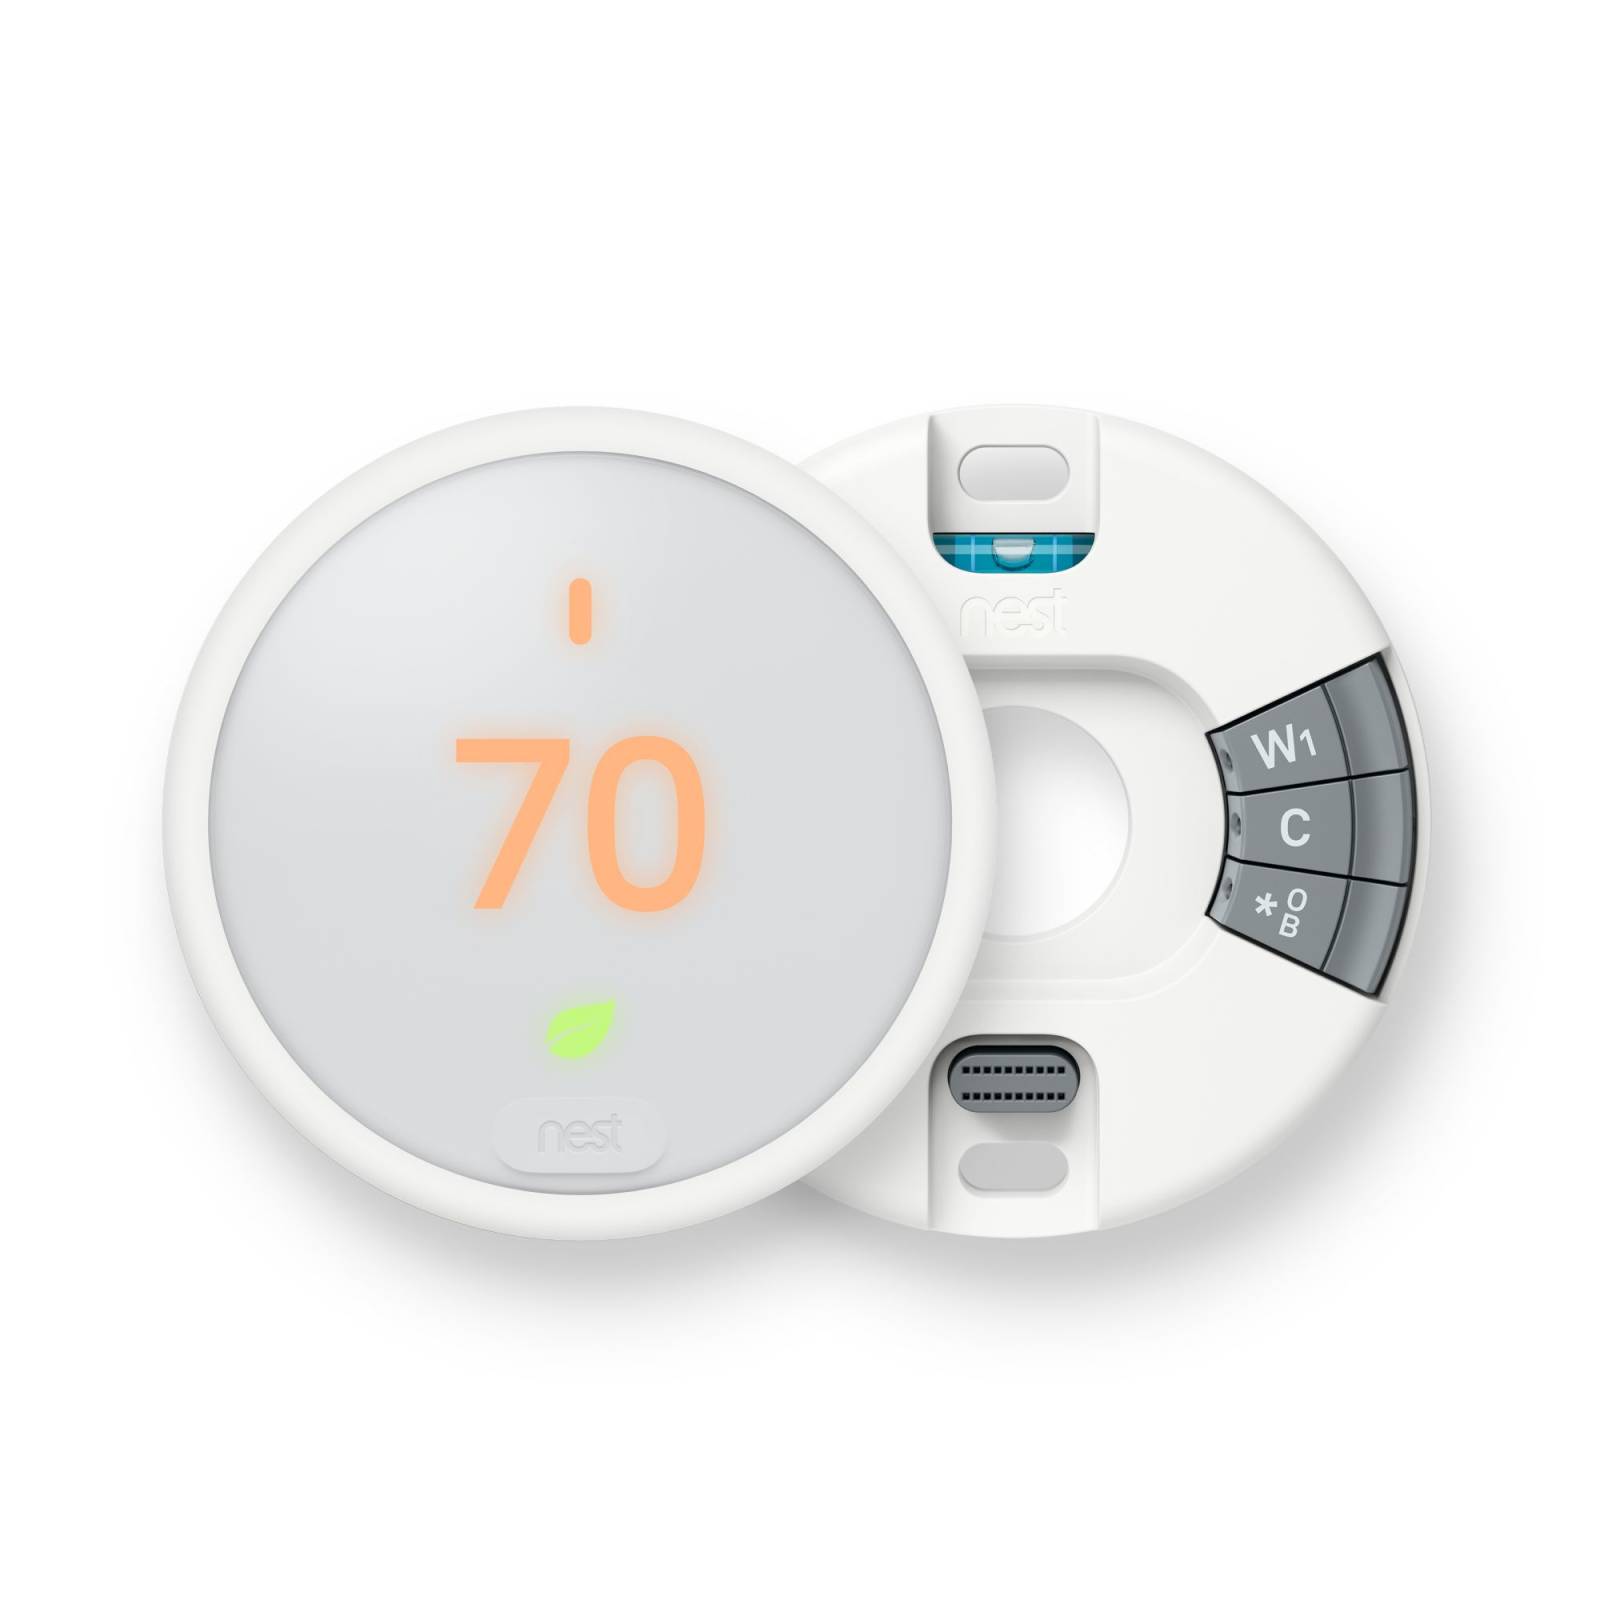 What Does “No Hub Required” Mean For Nest E Smart Thermostat